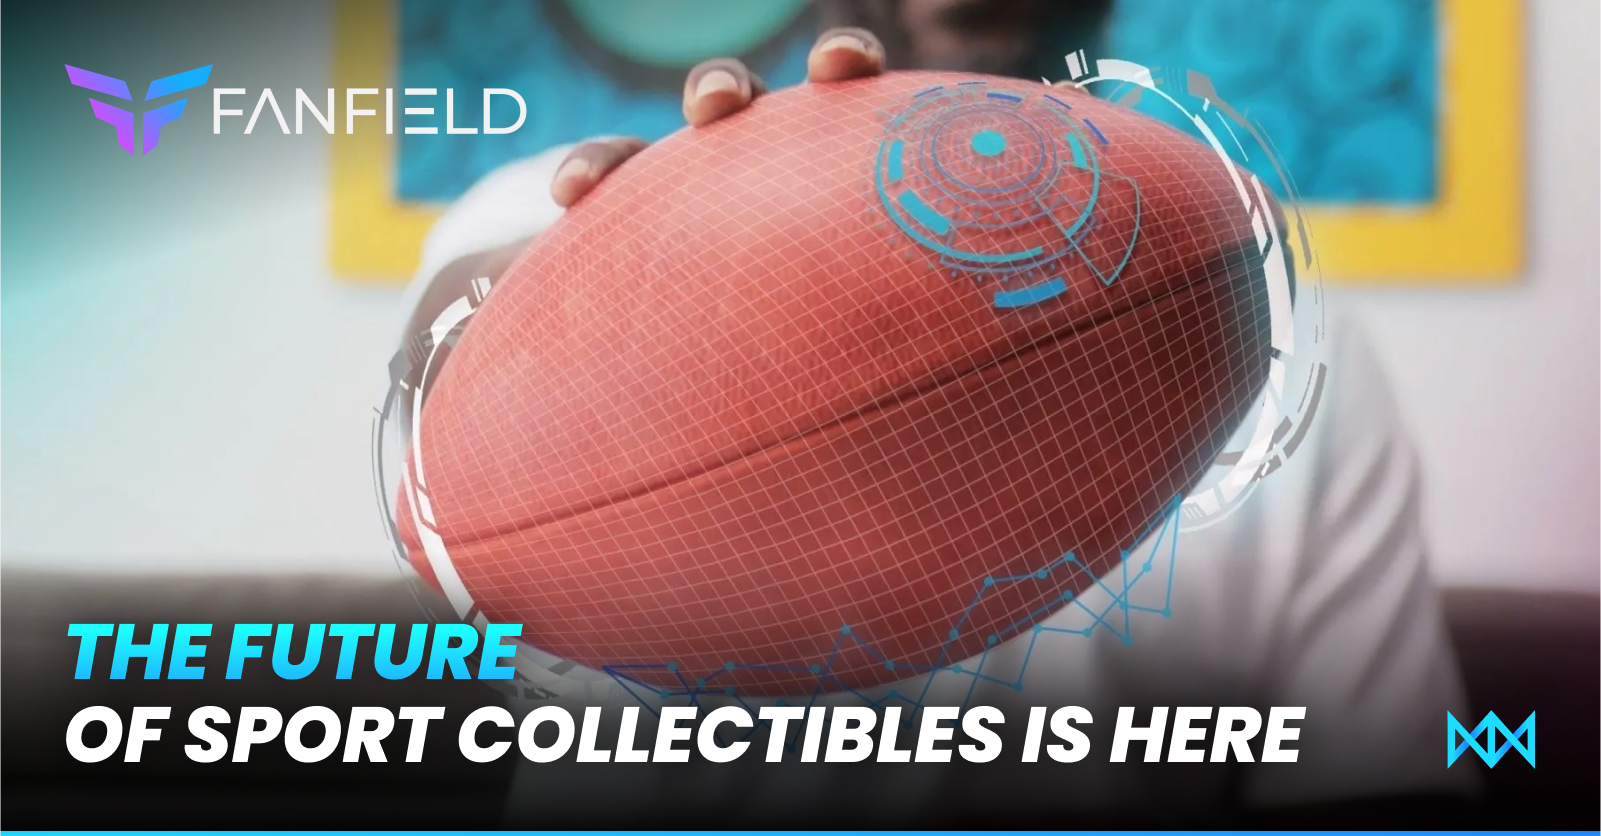 The Future of Sport Collectibles is Here